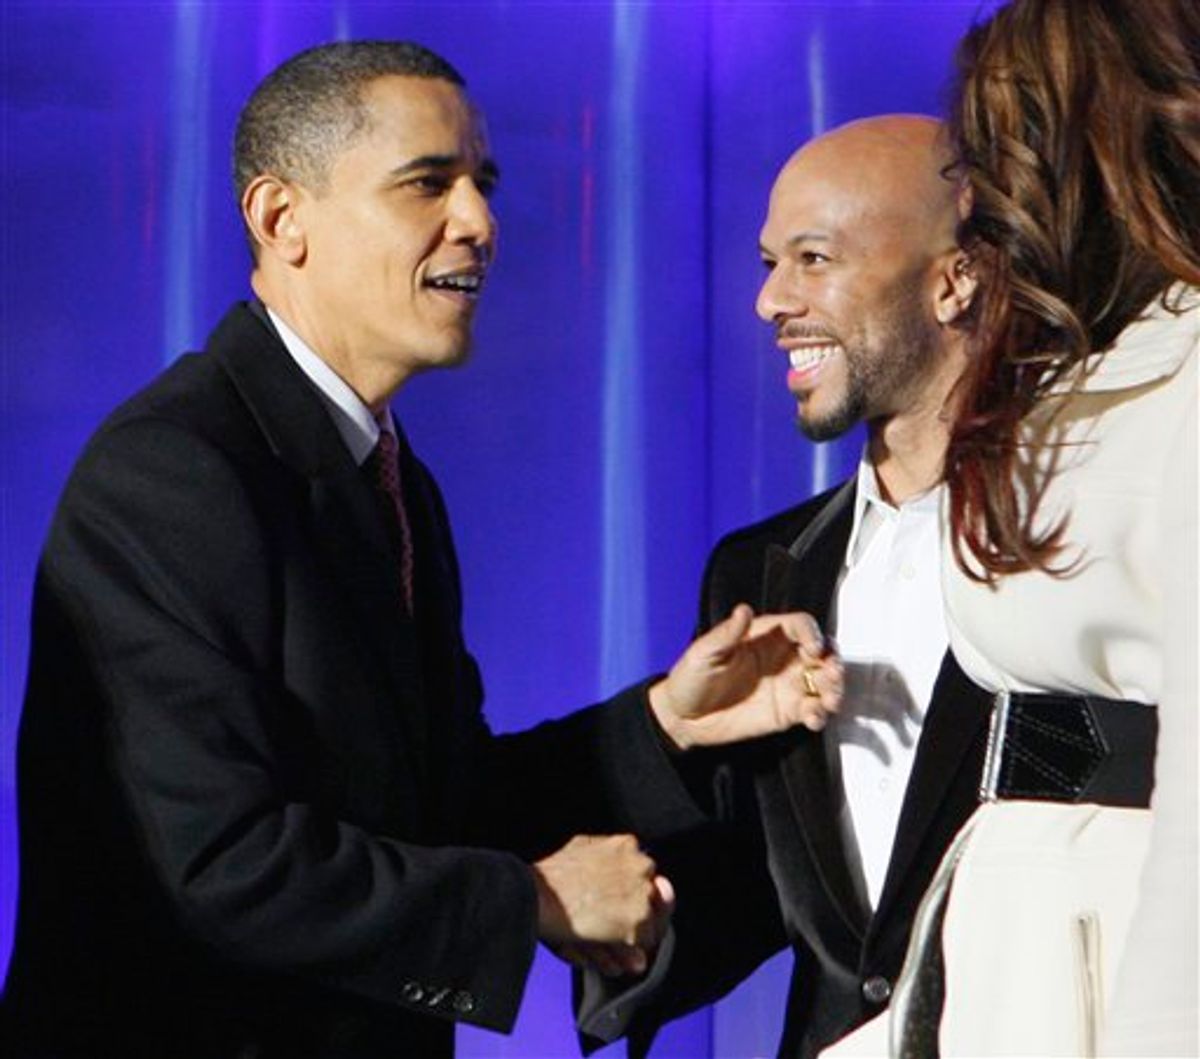 FILE - In this Dec. 3, 2009 file photo, President Barack Obama greets rapper Common at the National Christmas Tree Lighting Ceremony in Washington. Michelle Obama's "evening of poetry" at the White House set off Republican critics before the artists had uttered a word. But it was the inclusion of Common that set off Republicans. Common, who is considered fairly tame as rappers go, is known for rhymes that tend to be socially and politically conscious. (AP Photo/Charles Dharapak, File) (AP)